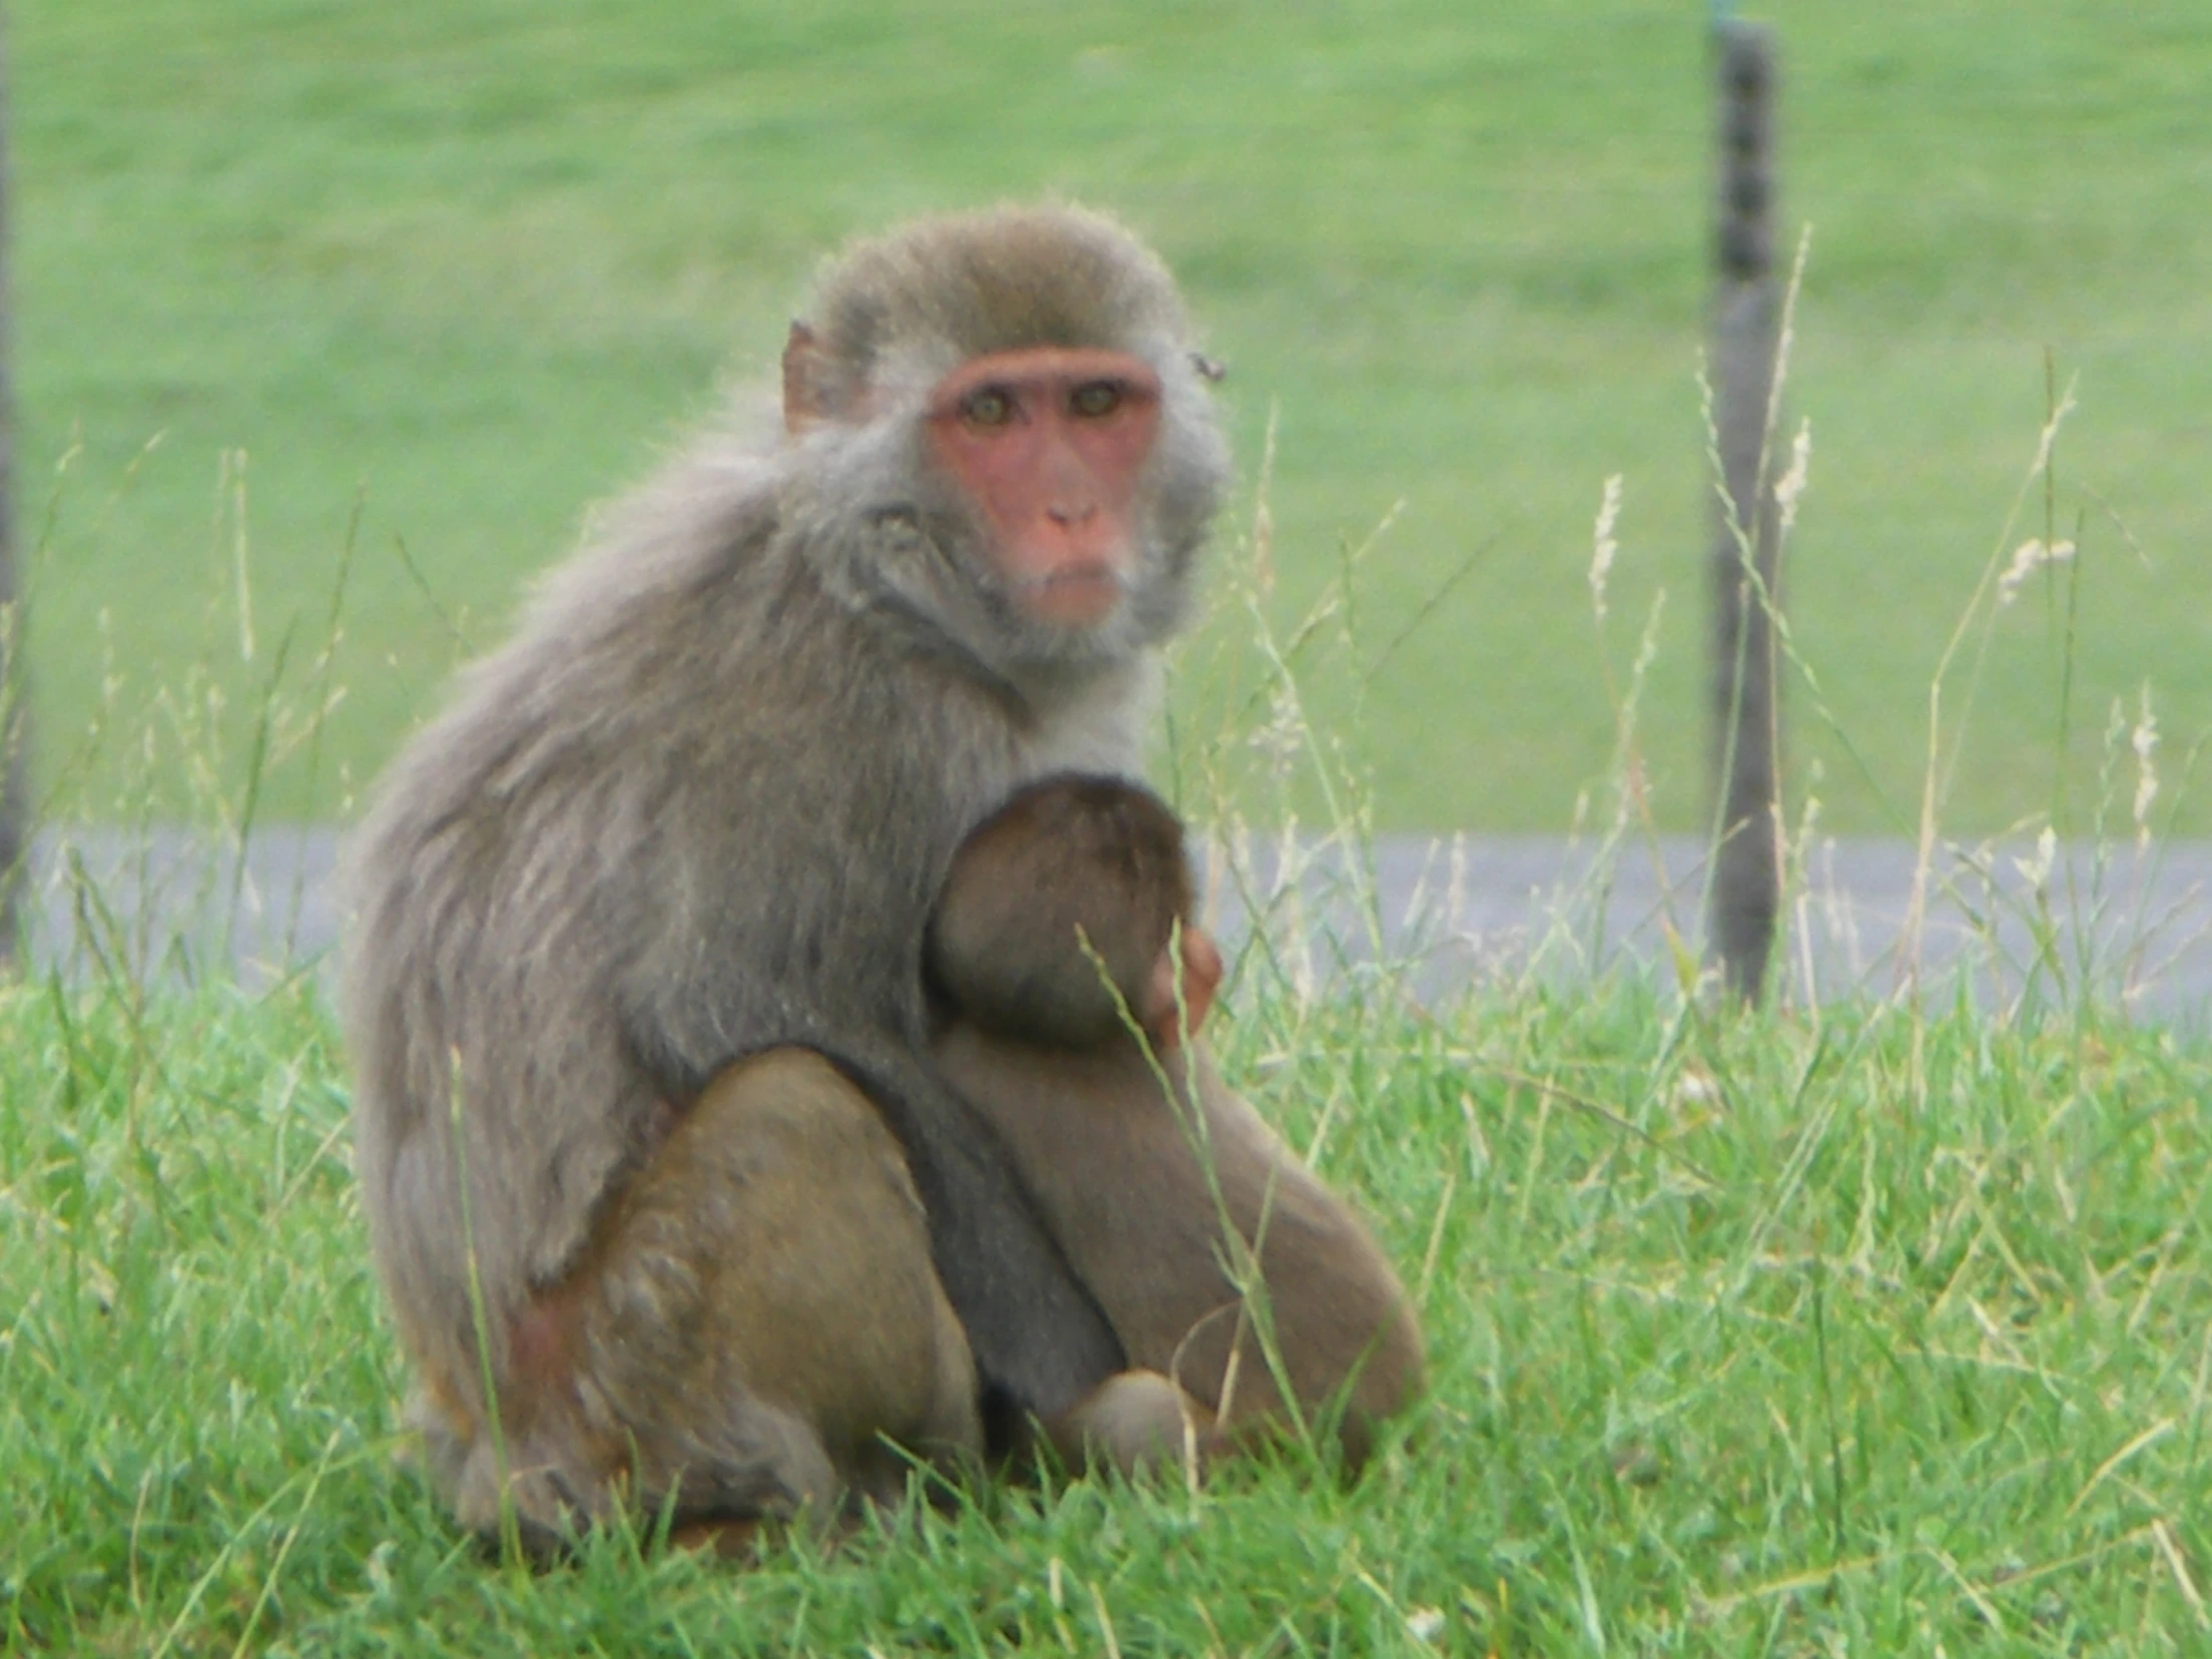 a monkey sits in the grass with a young one